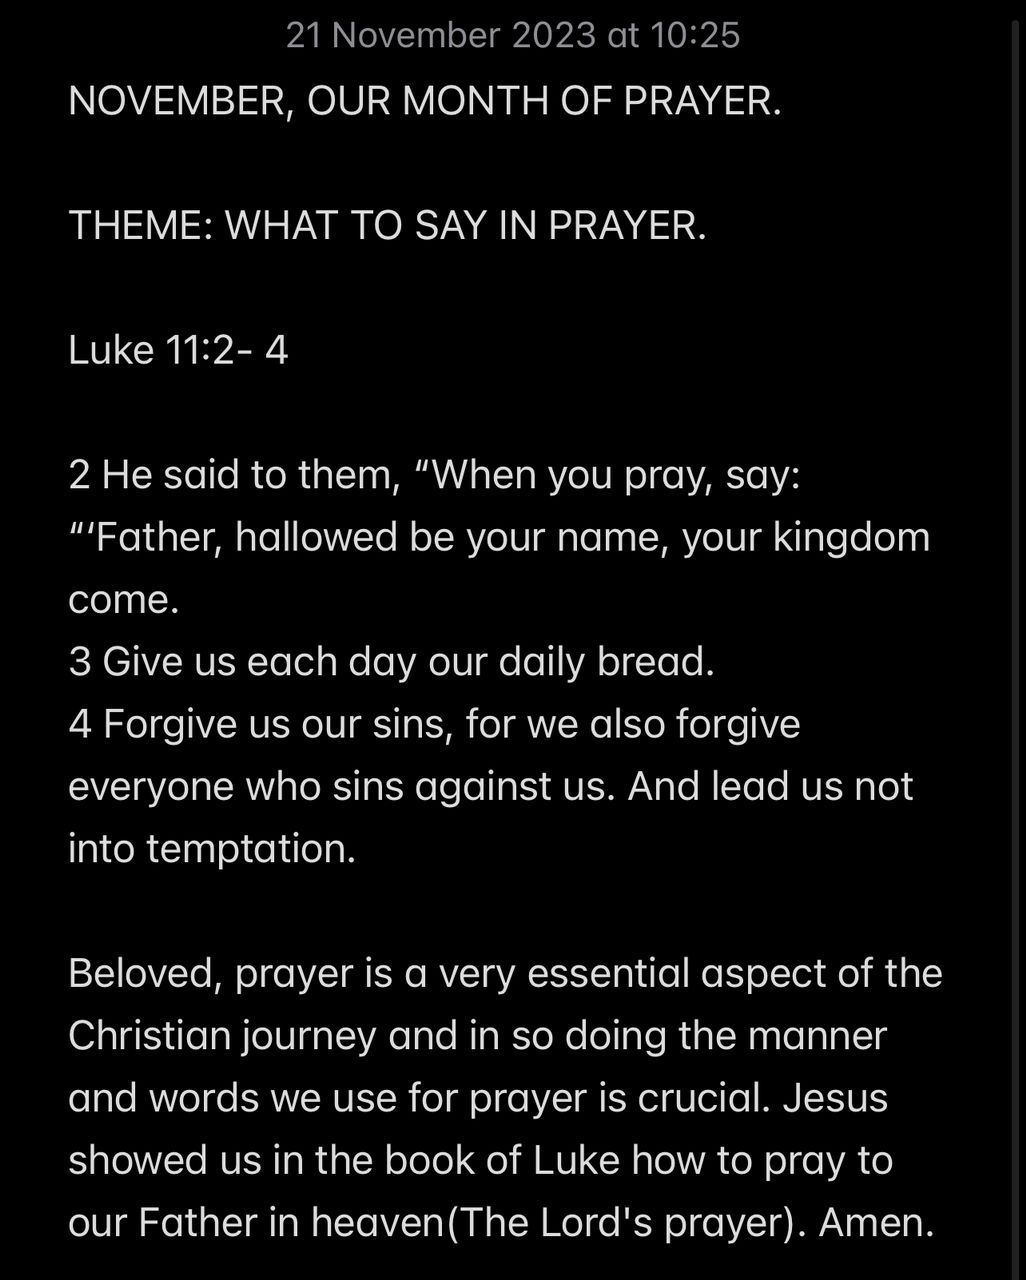 WHAT TO SAY IN PRAYER.